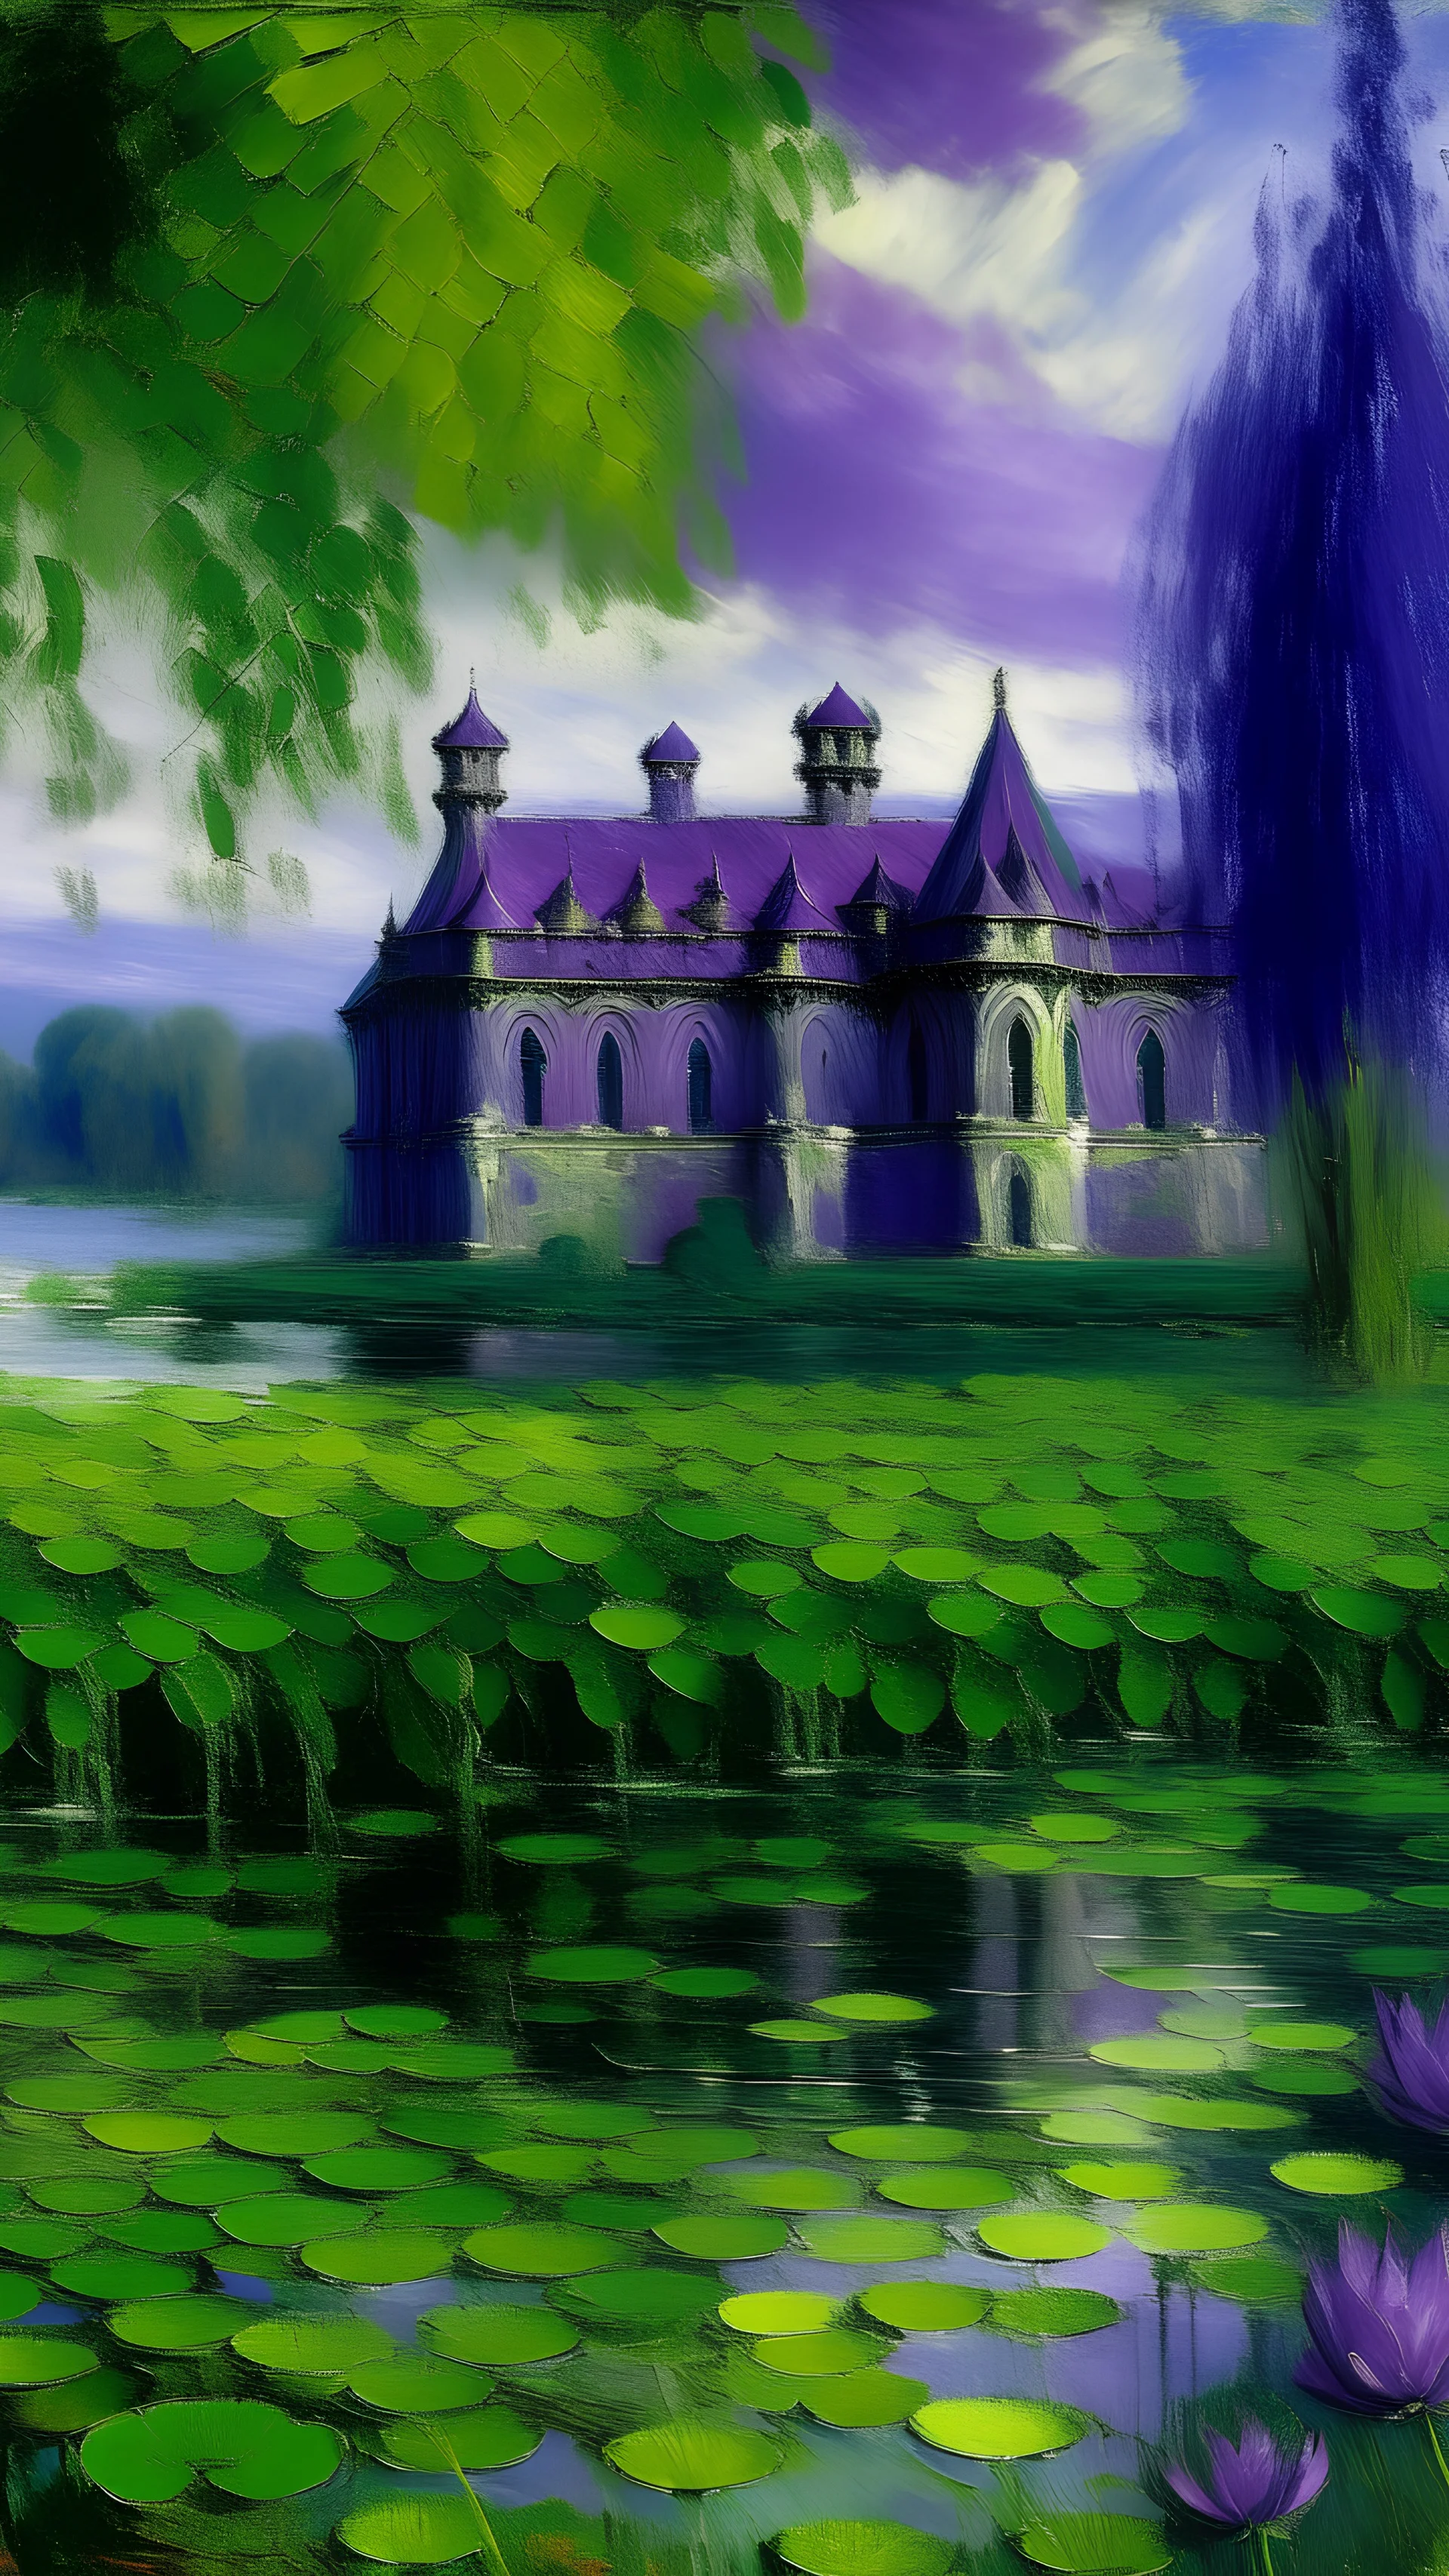 A purple castle near a toxic lilypond painted by Claude Monet